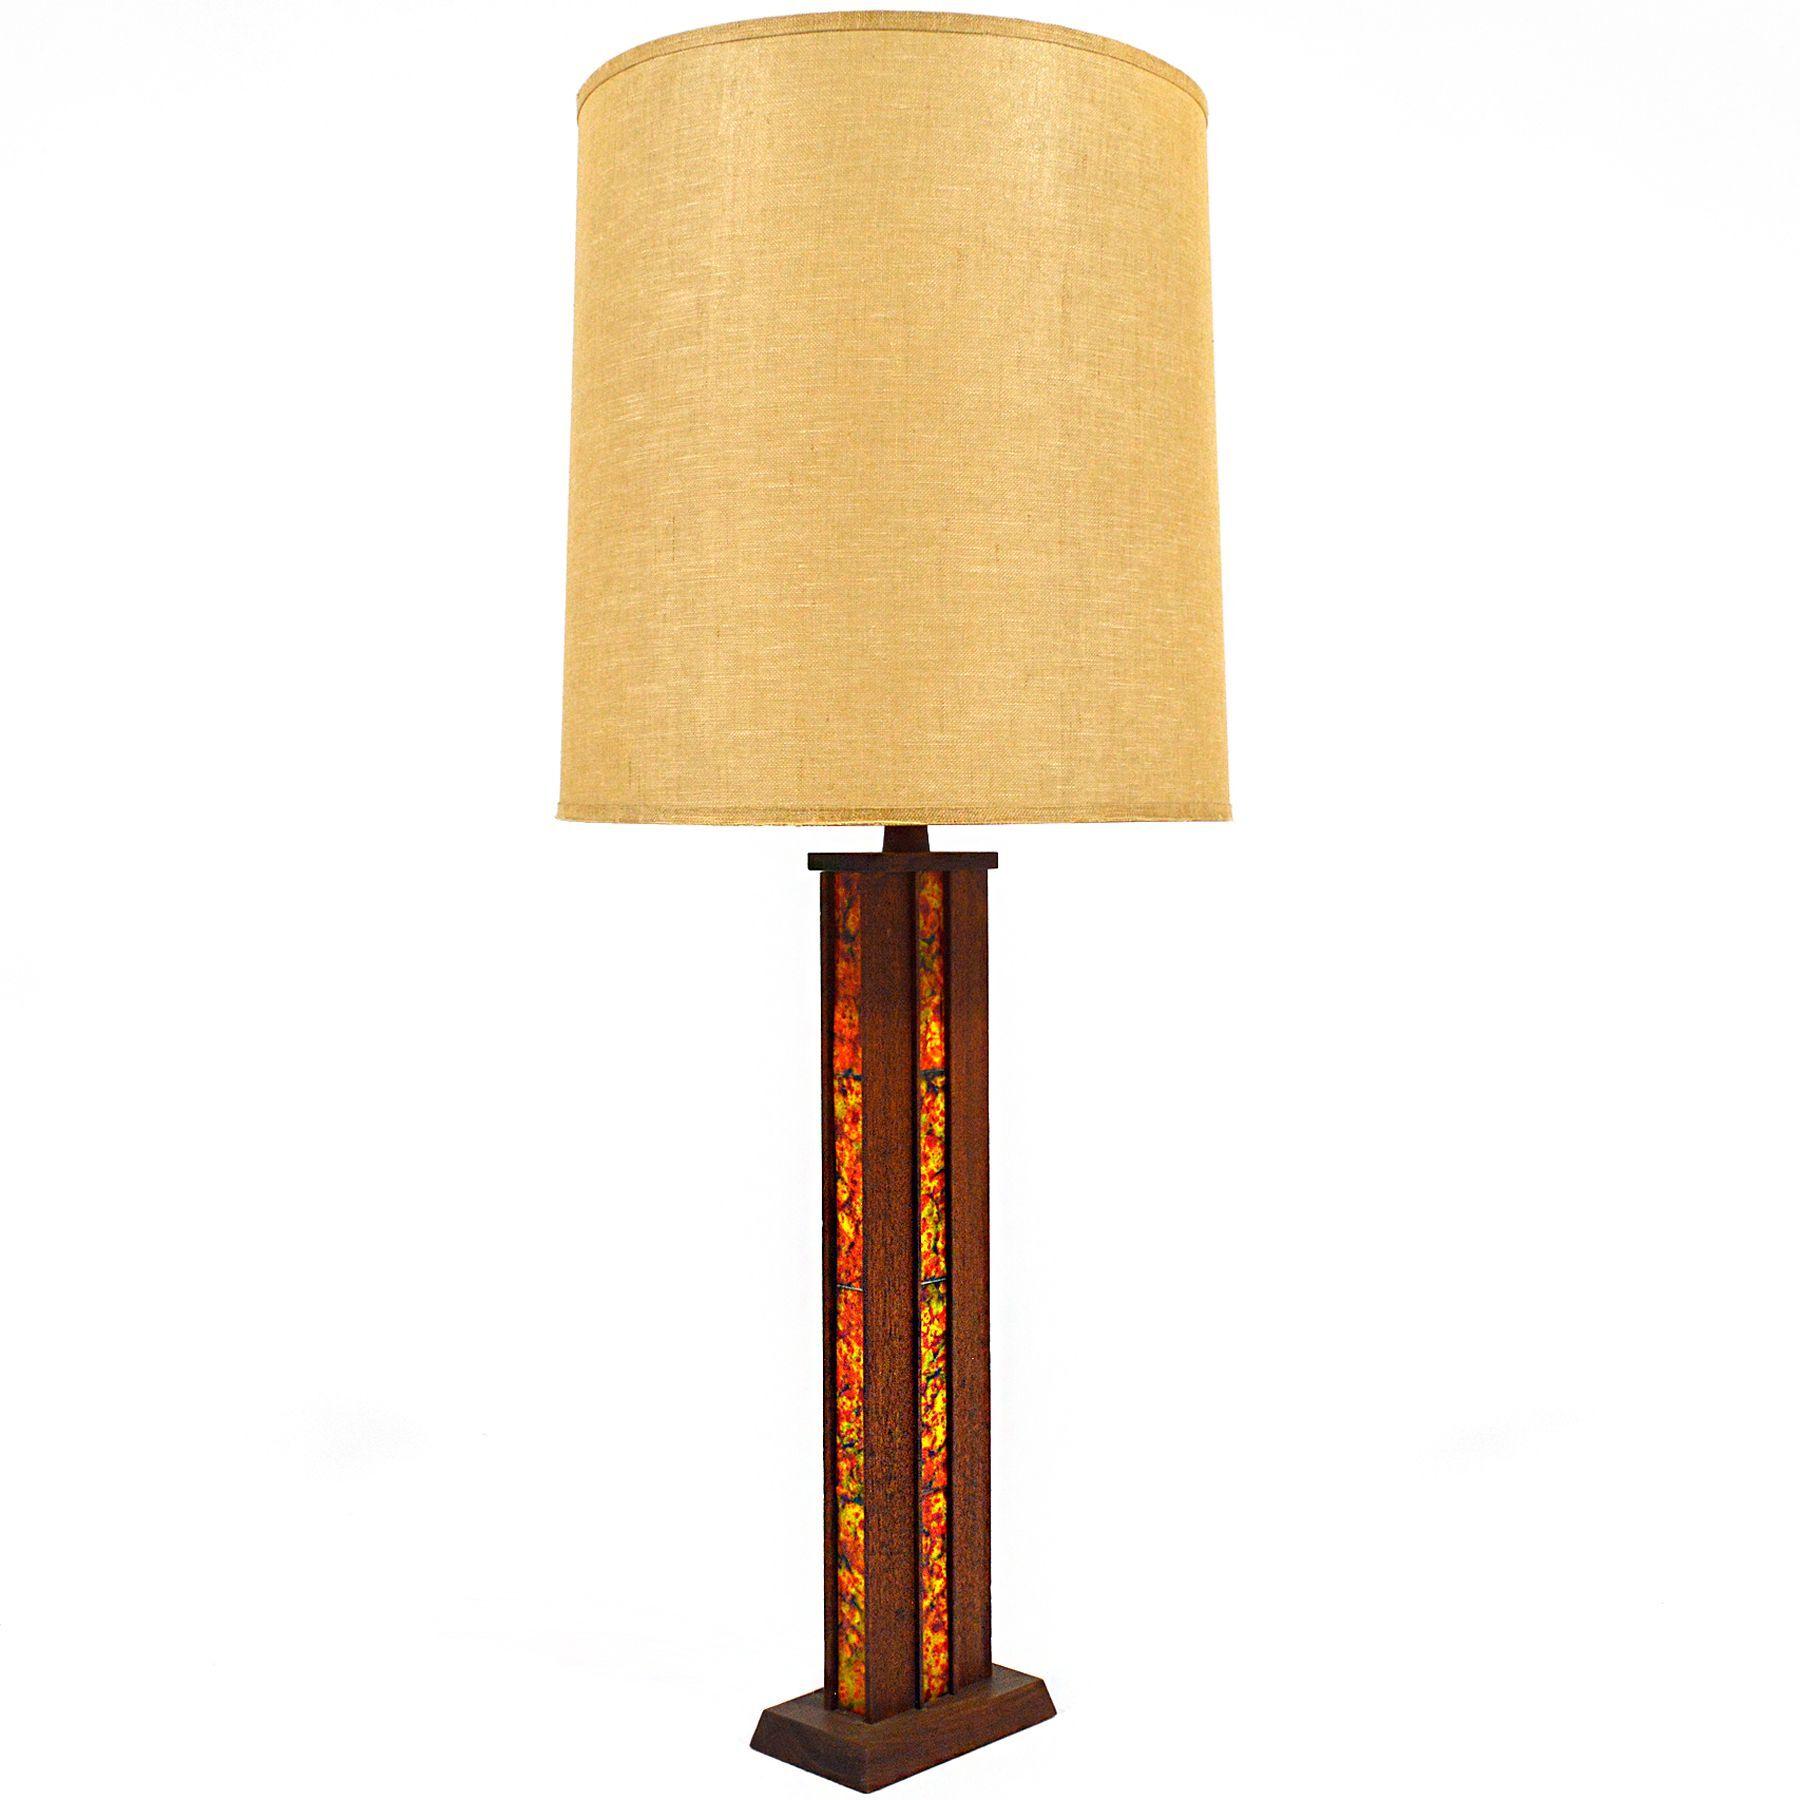 Harris Strong Oversize Table Lamp